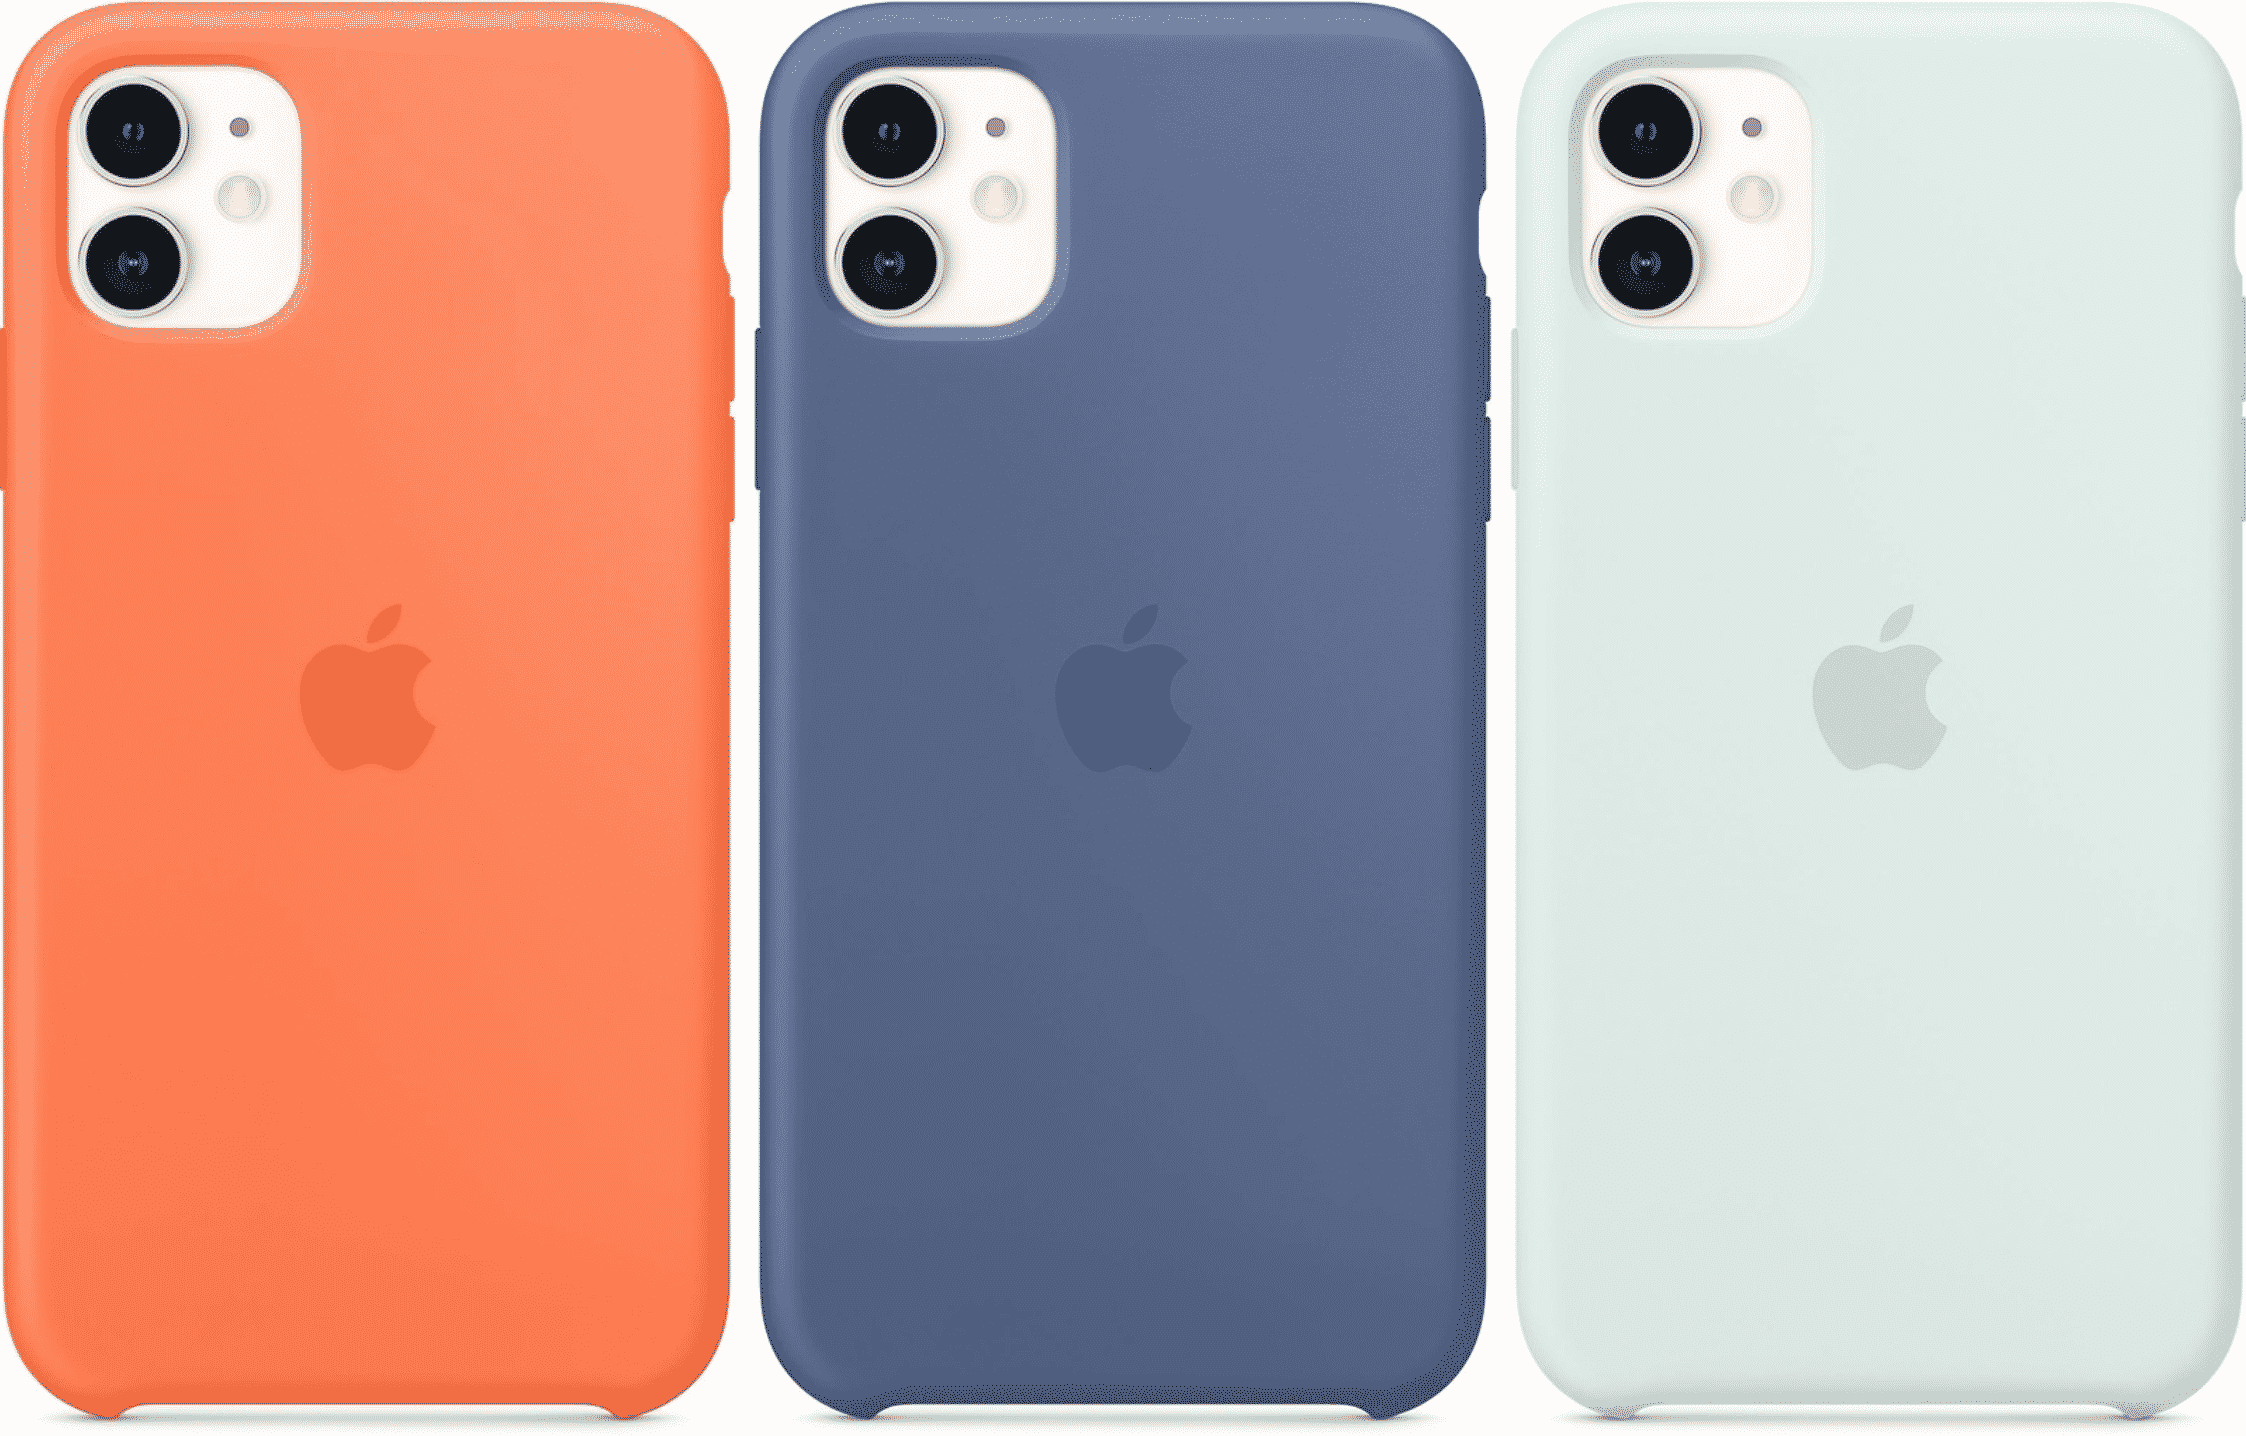 Cases for iPhone 11 and iPhone 11 Pro